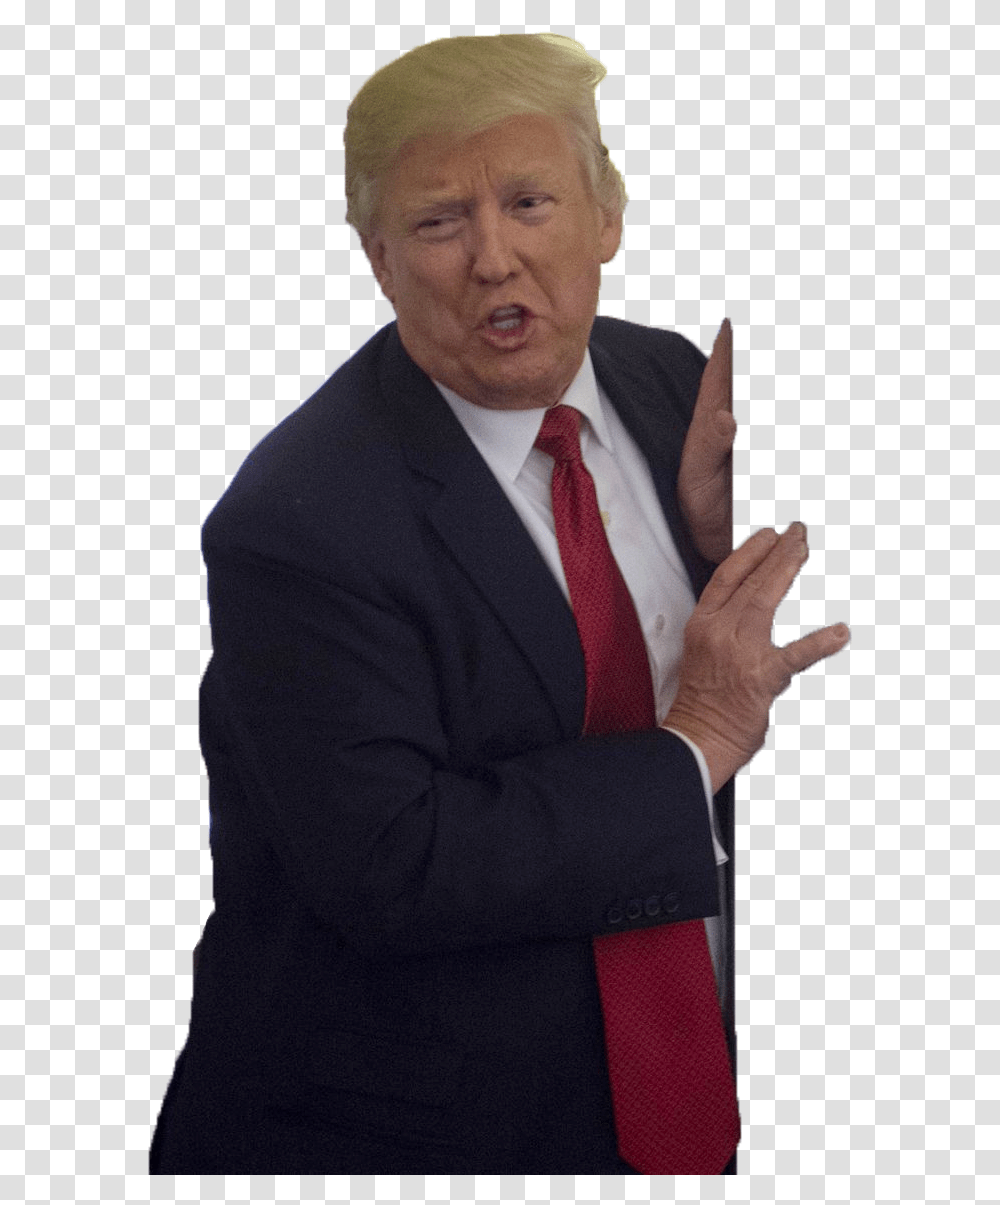 Donald Trump President Of The United States Businessperson Donald Trump Background, Tie, Accessories, Accessory, Human Transparent Png